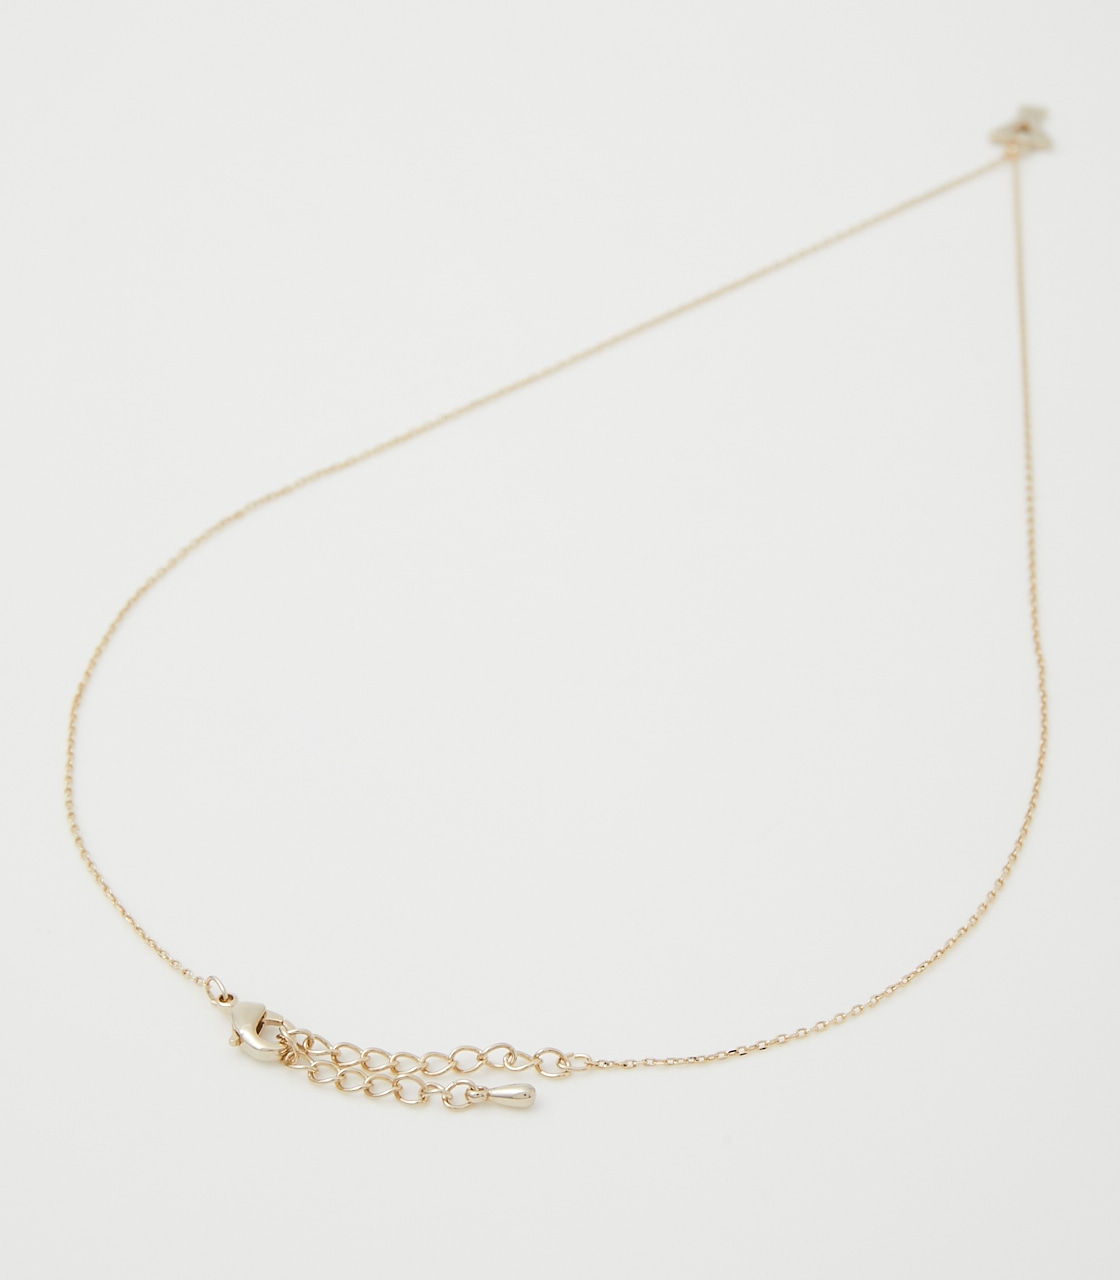 INITIAL GOLD NECKLACE/イニシャルゴールドネックレス 詳細画像 Multi_3 3